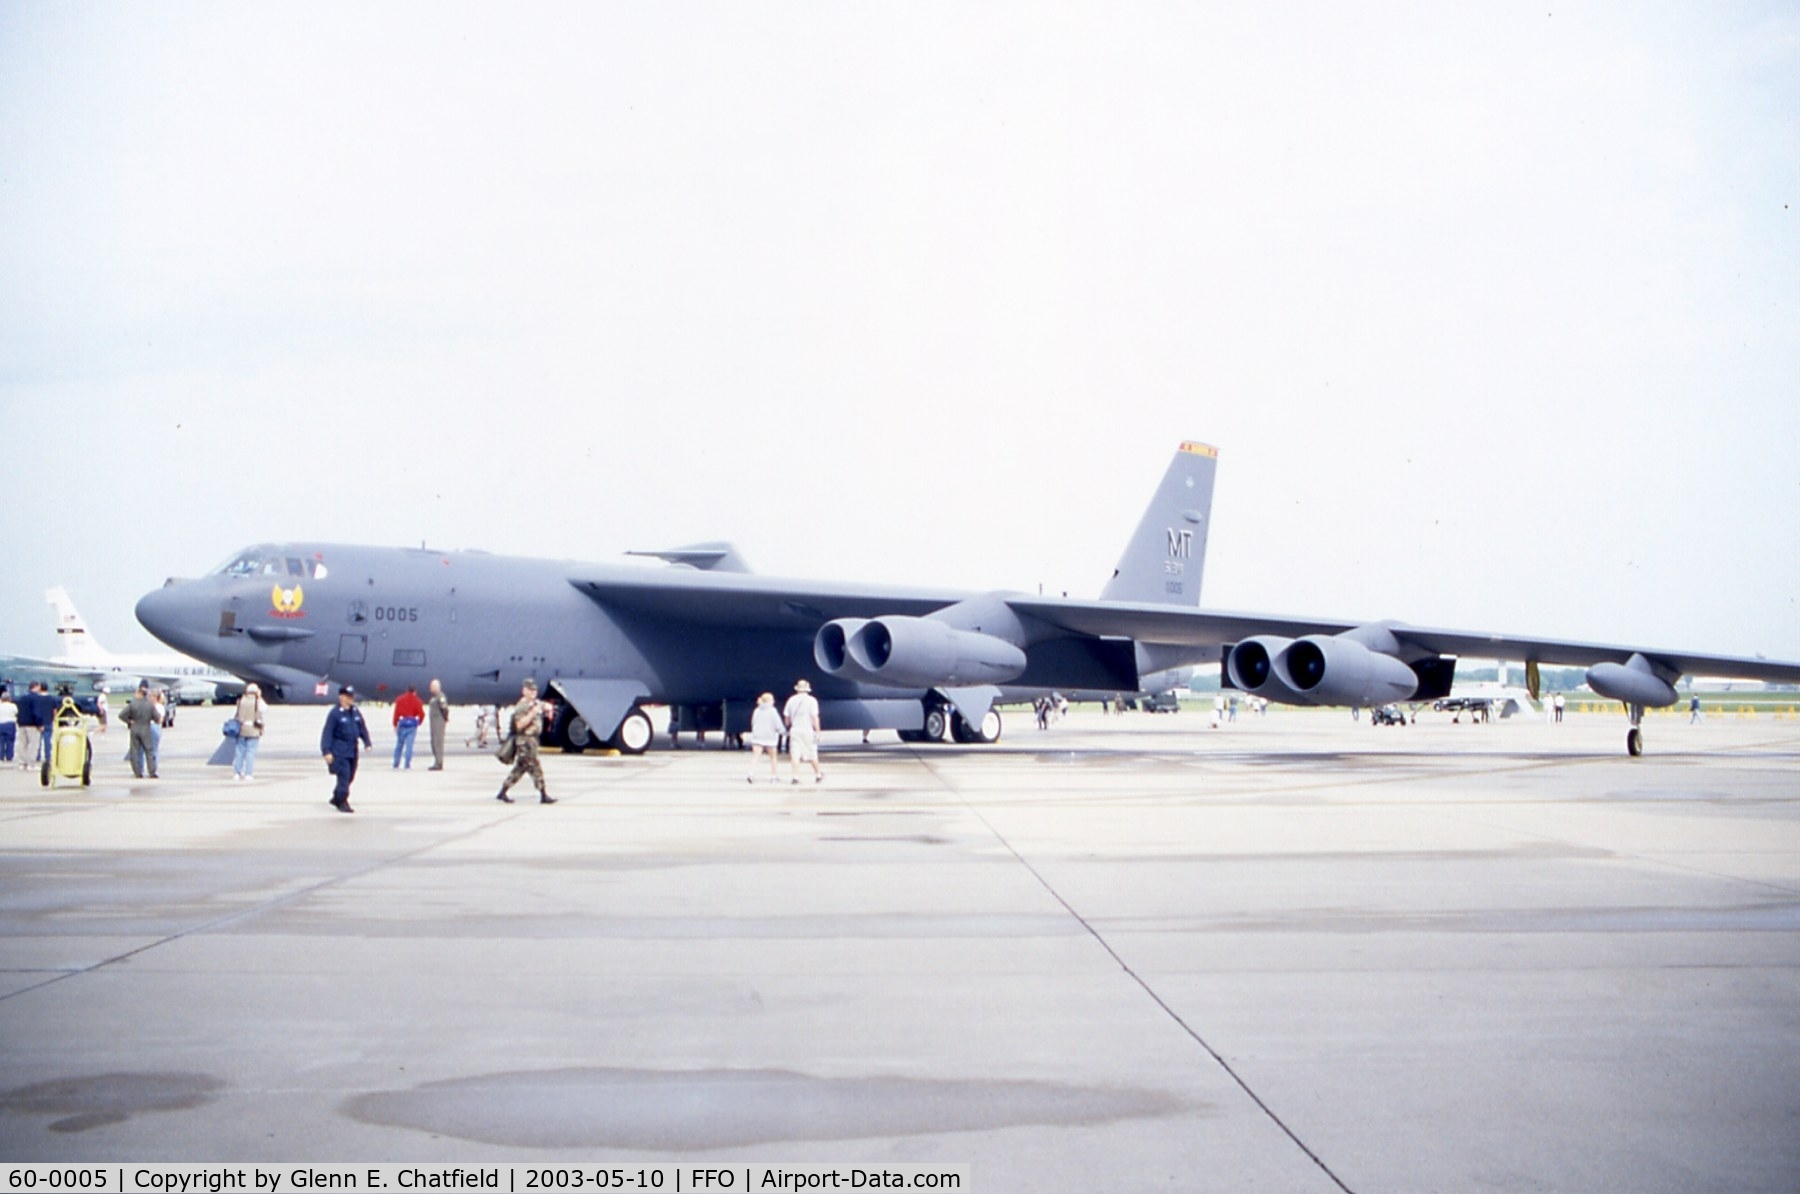 60-0005, 1960 Boeing B-52H Stratofortress C/N 464370, B-52H at the 100th anniversary of flight